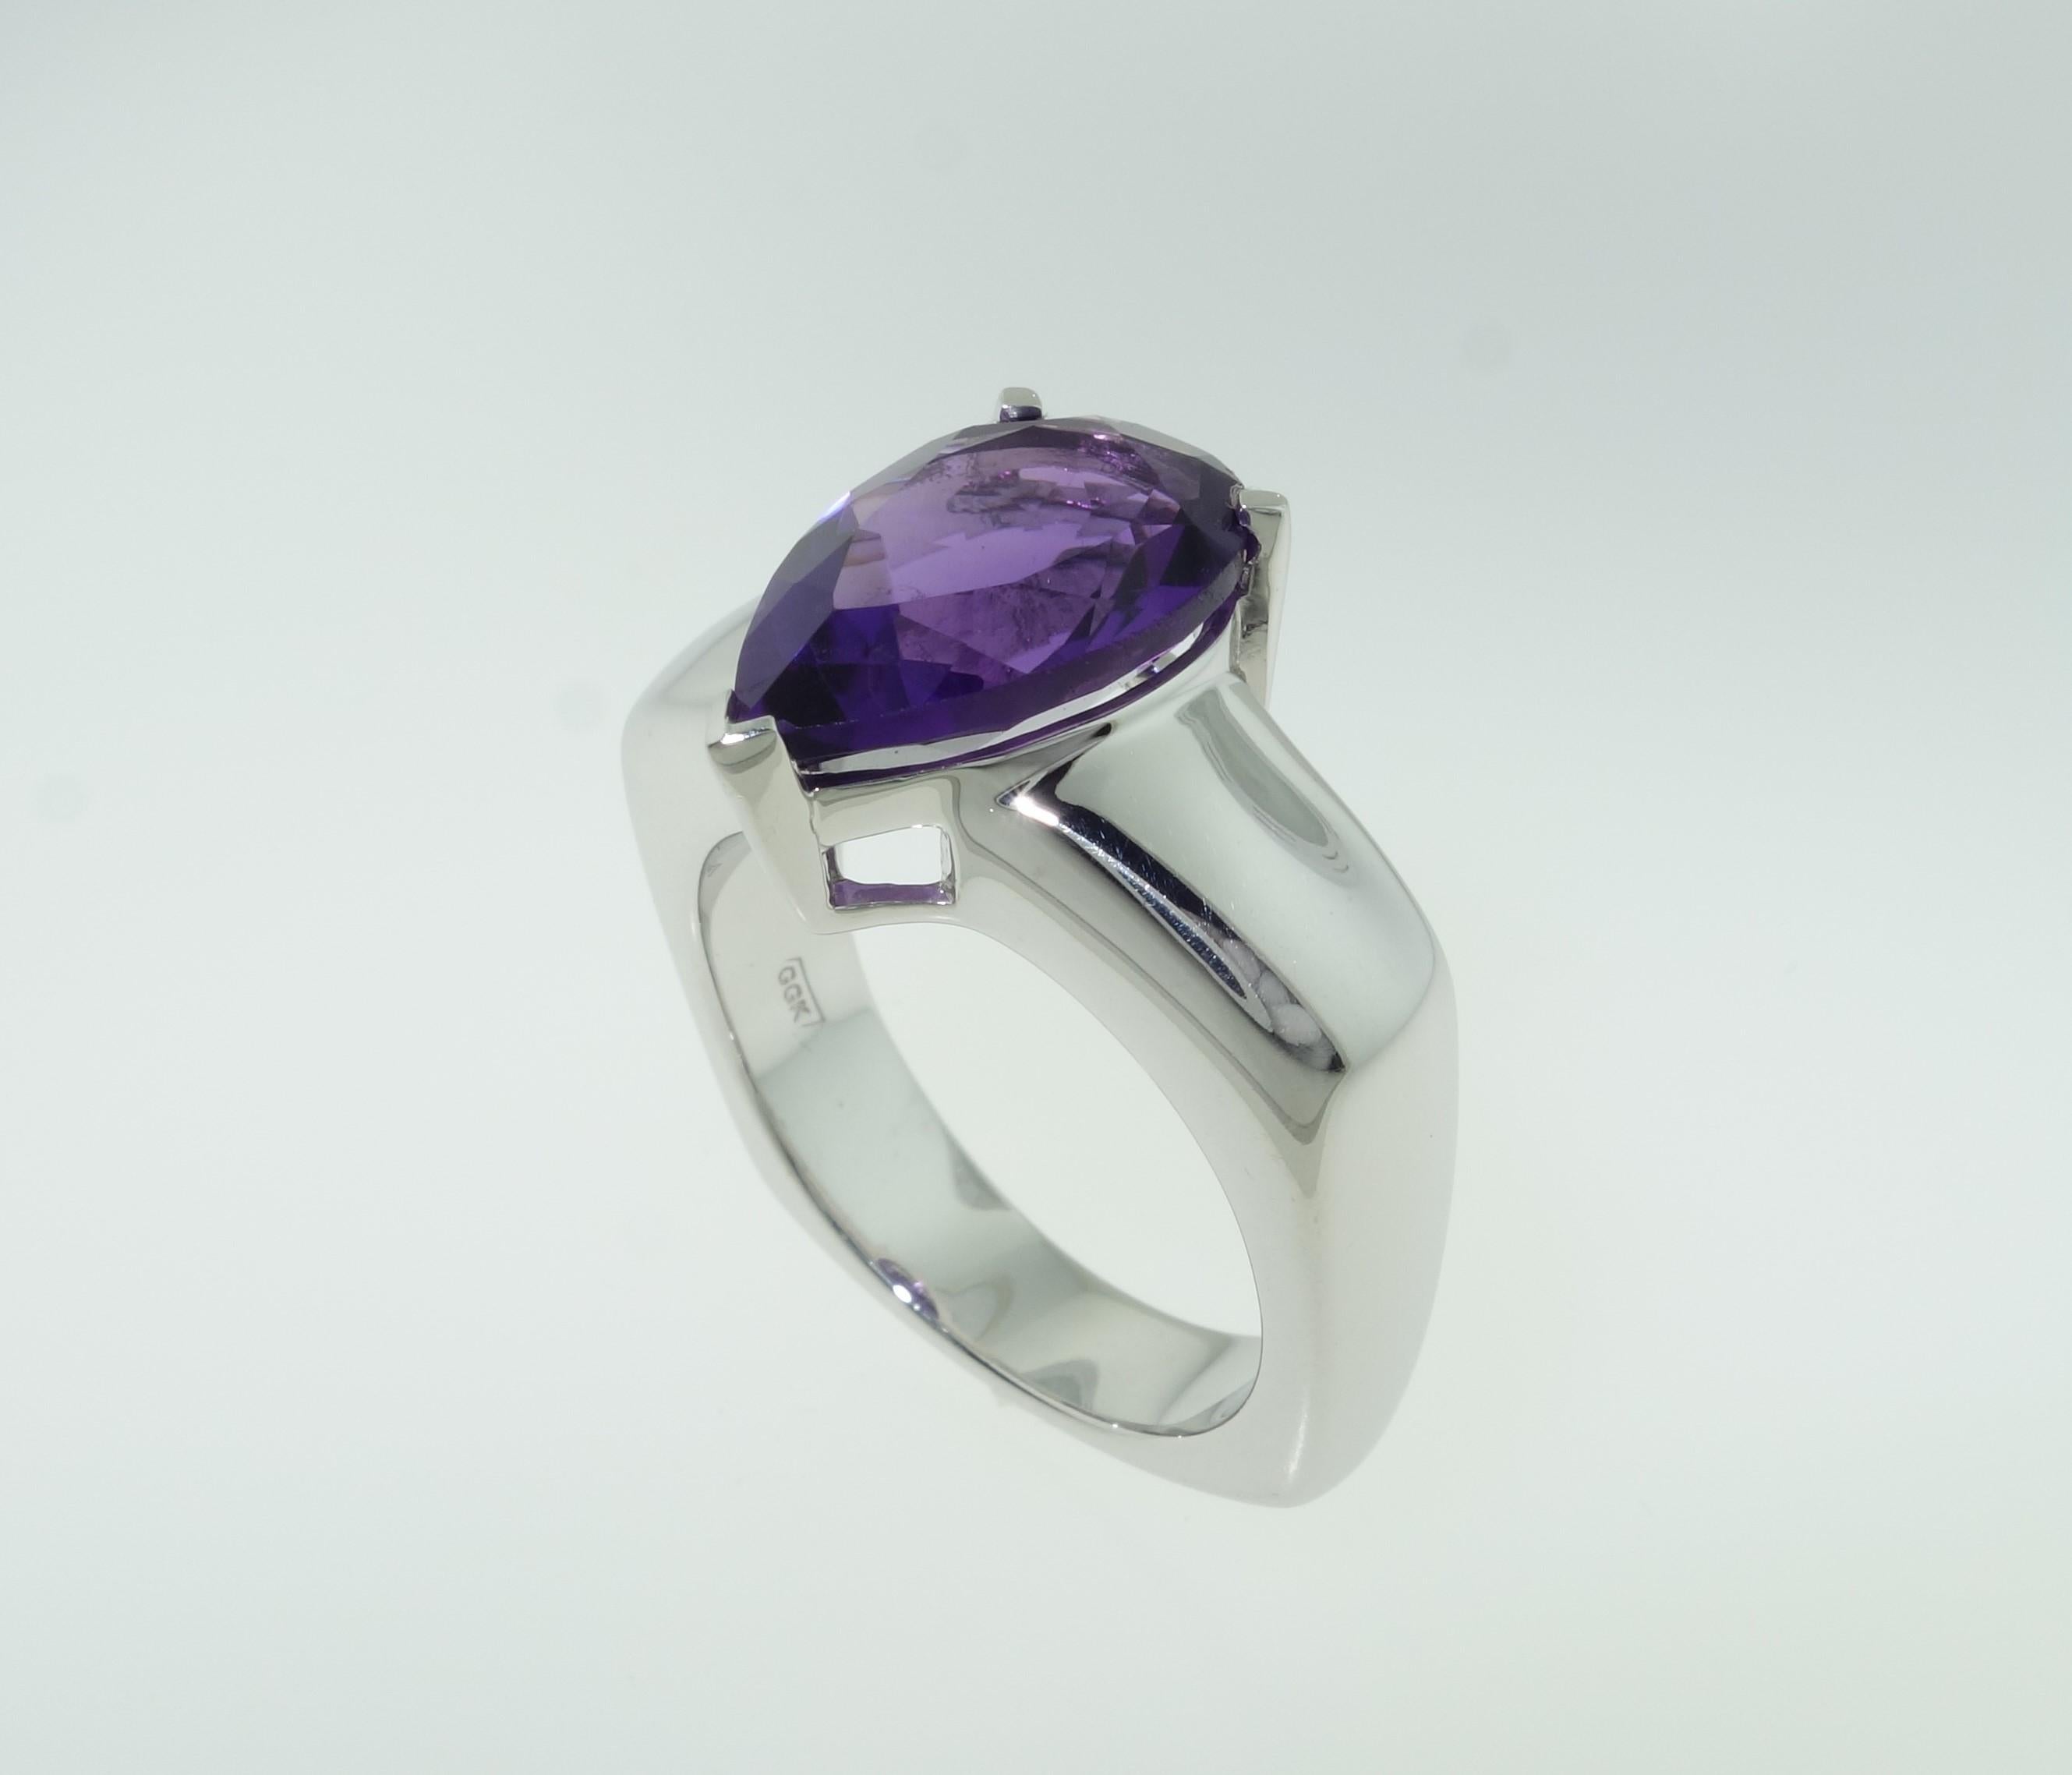 Beautiful solitaire ring featuring a 3.95 carat Amethyst; Sterling Silver Tarnish-resistant Rhodium mounting; Size 8, we offer ring re-sizing. Stylish and Classy…illuminating your look with Timeless Beauty! 
